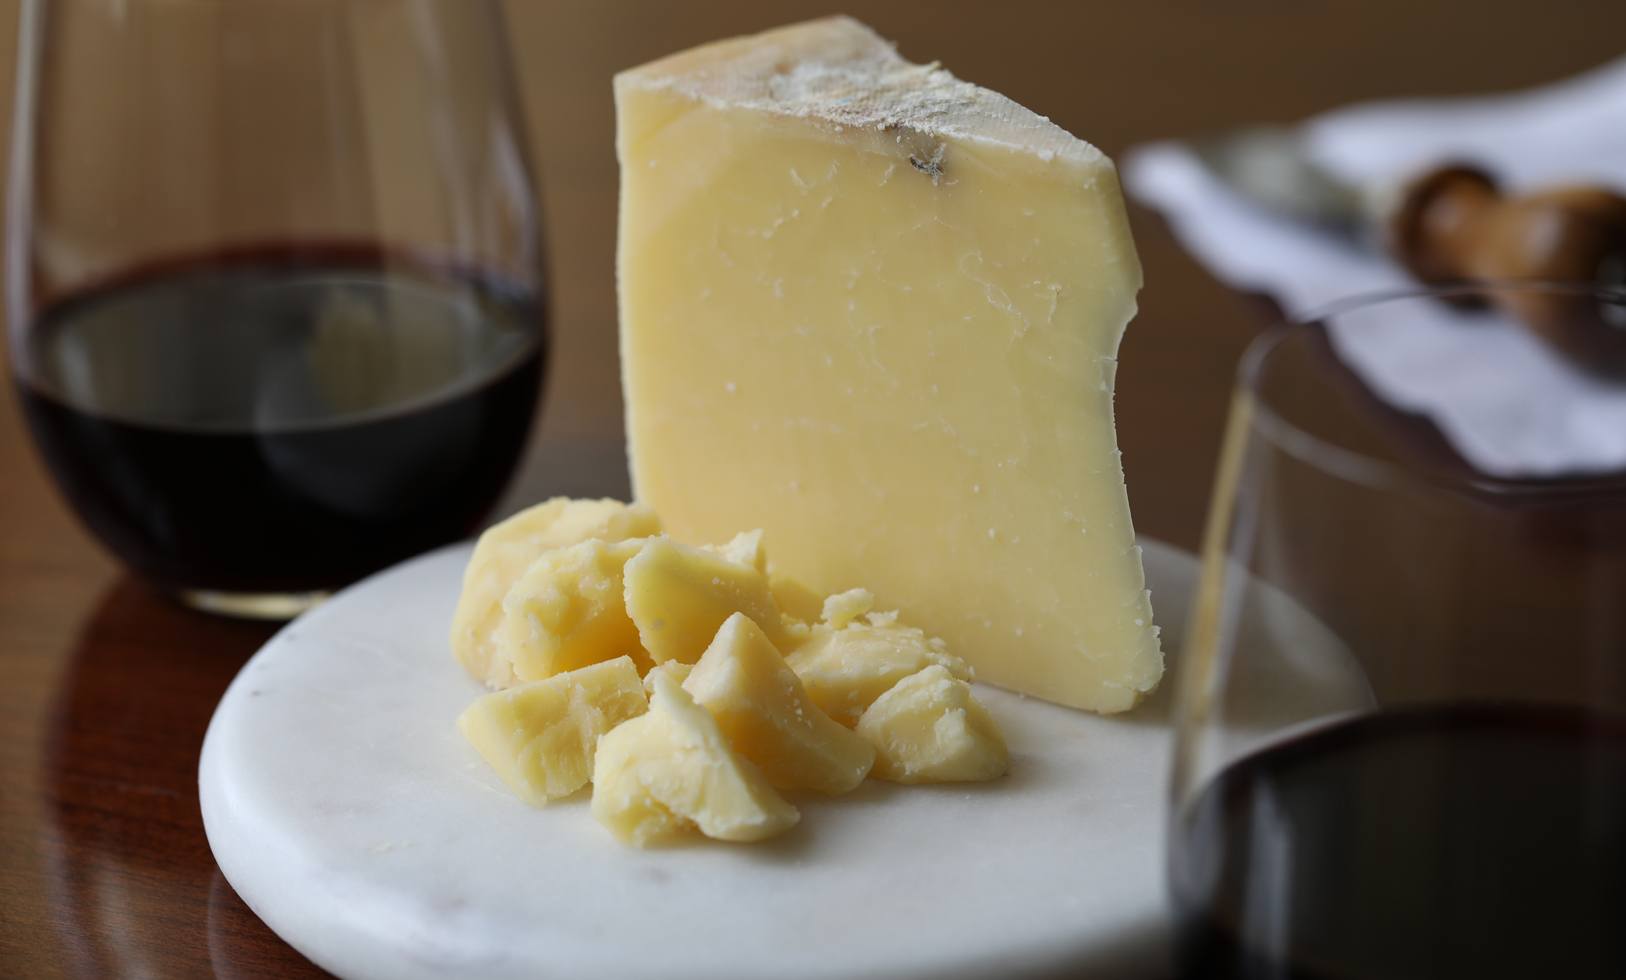 Wine and Cheese Pairing Tips: Best Cheeses with Cabernet Sauvignon